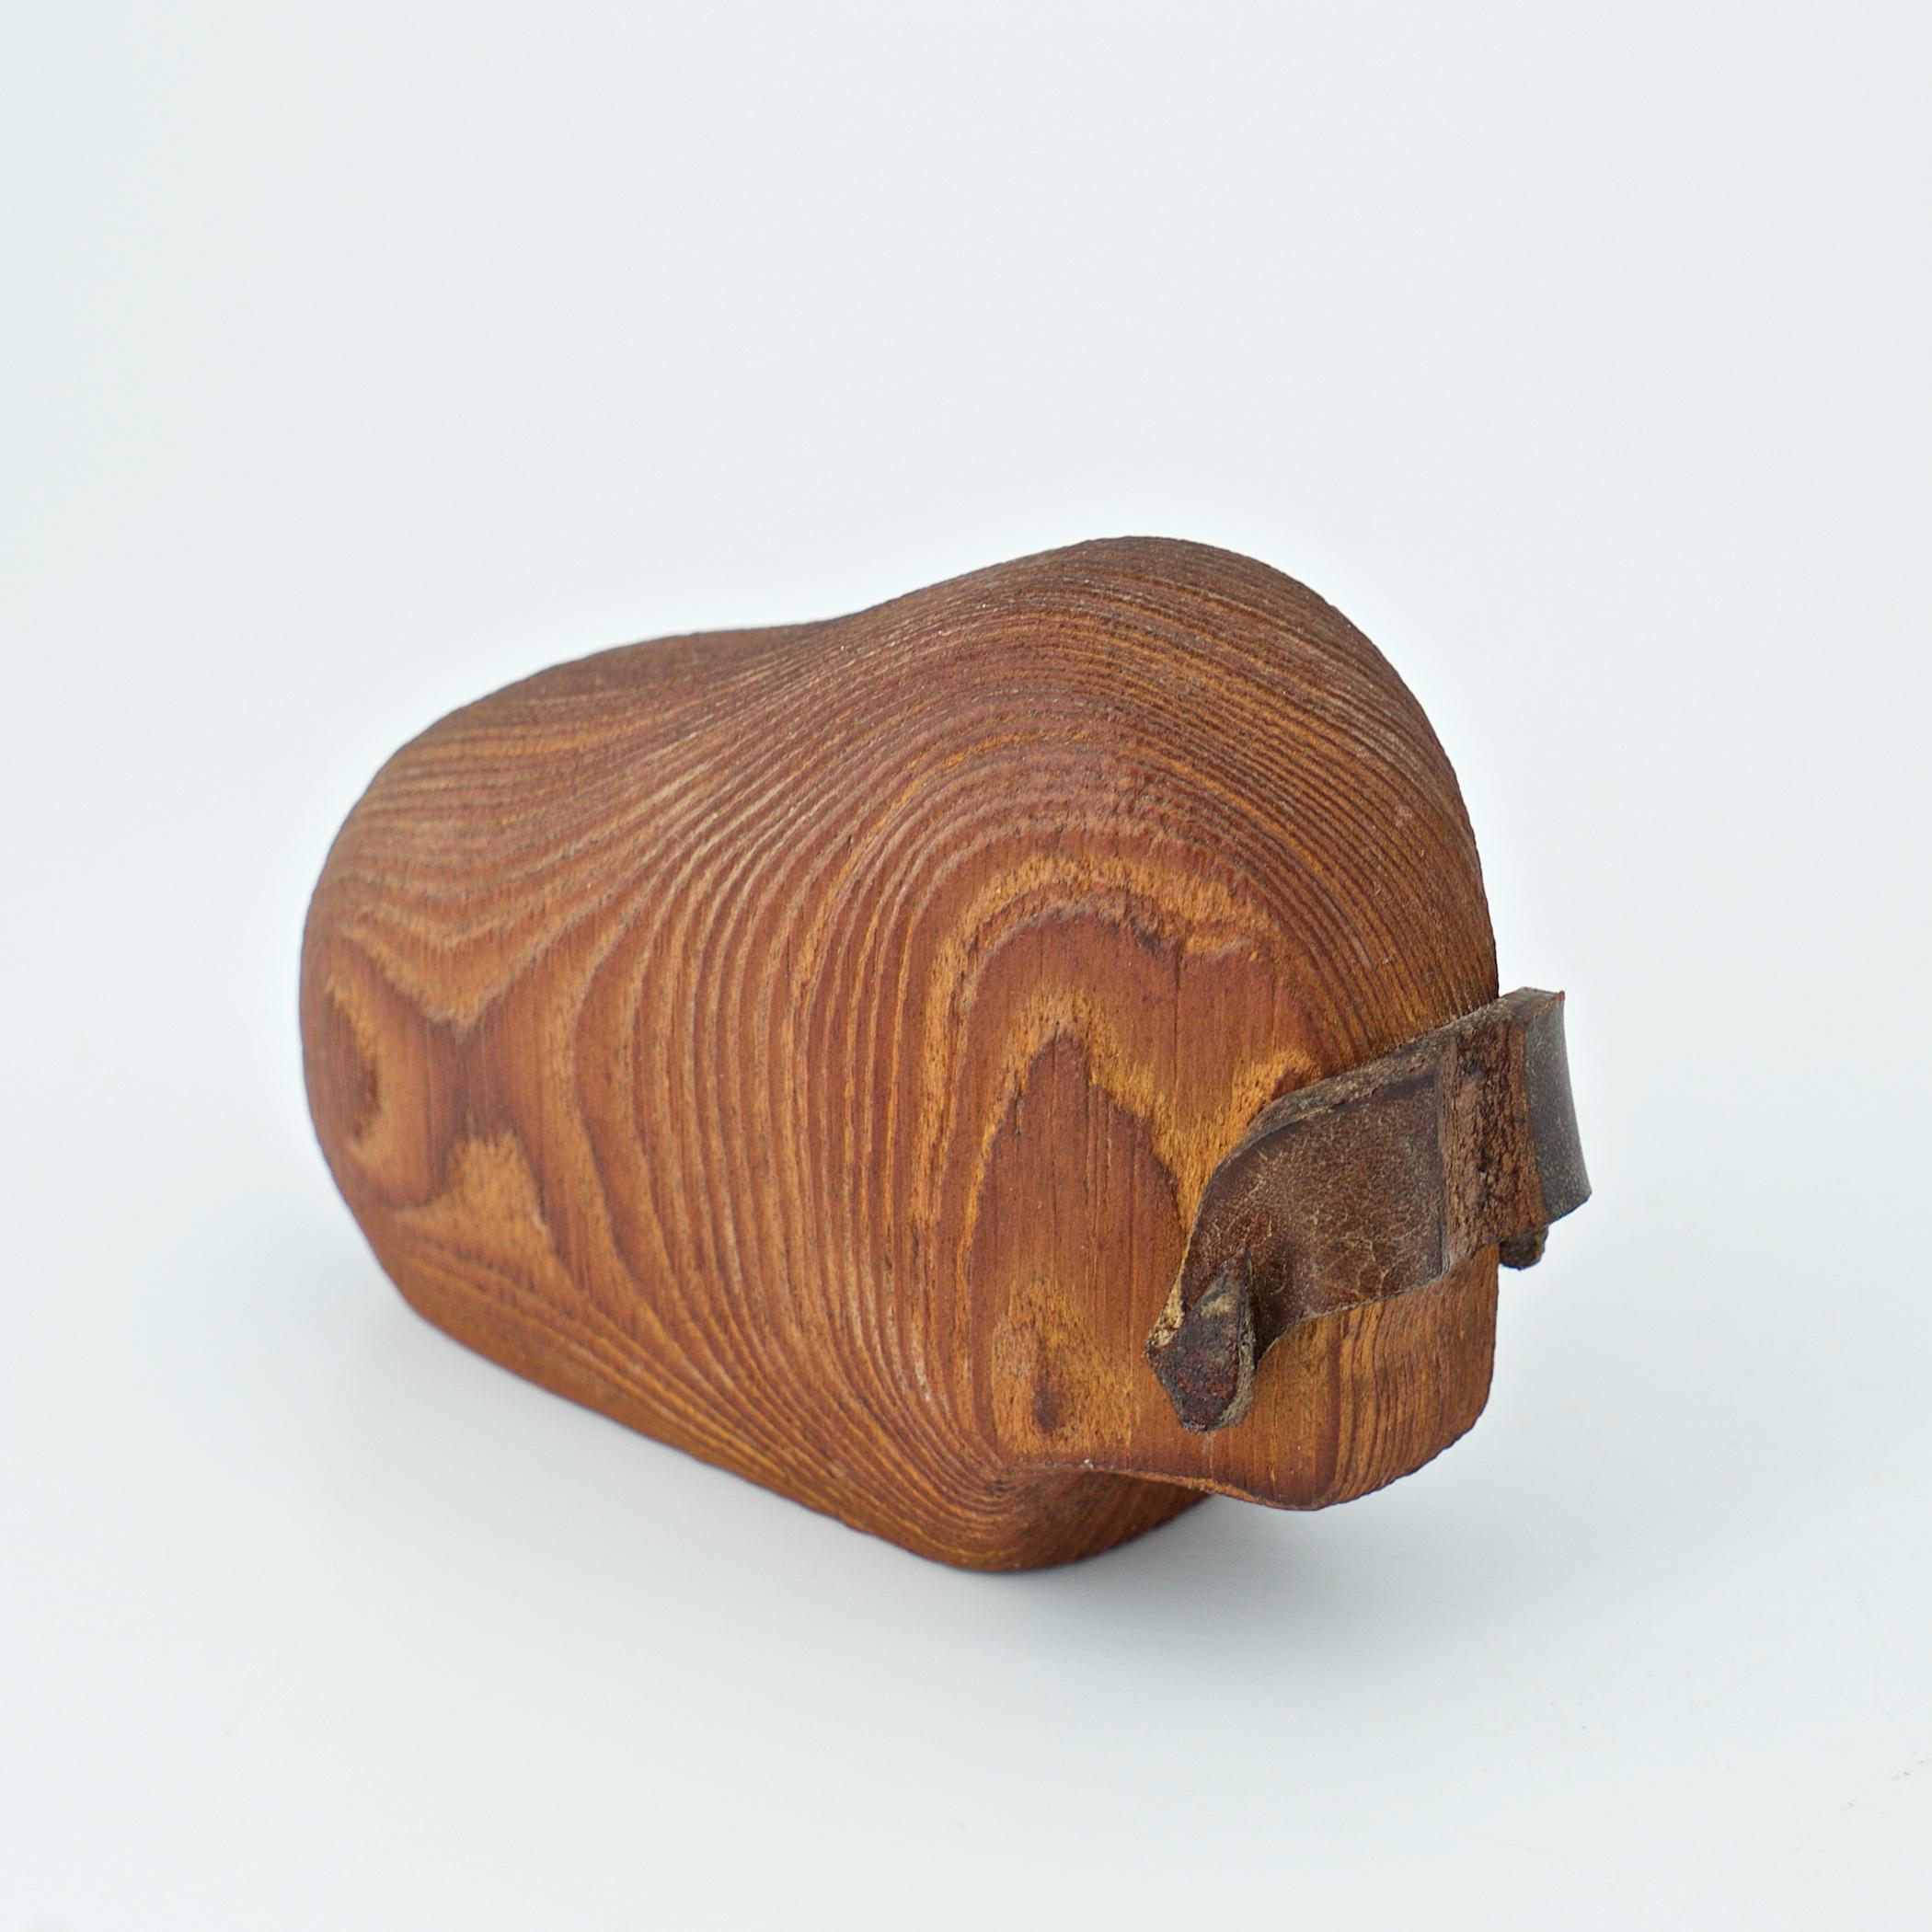 Rare muskox figure. Hand worked Norwegian pine wood and leather.

Arne Tjomsland was Norways leading souvenir designer in the 1950s and 1960s. Arne Tjomsland's artistic style is characterized by soft structural lines, essence and minimalism, as if